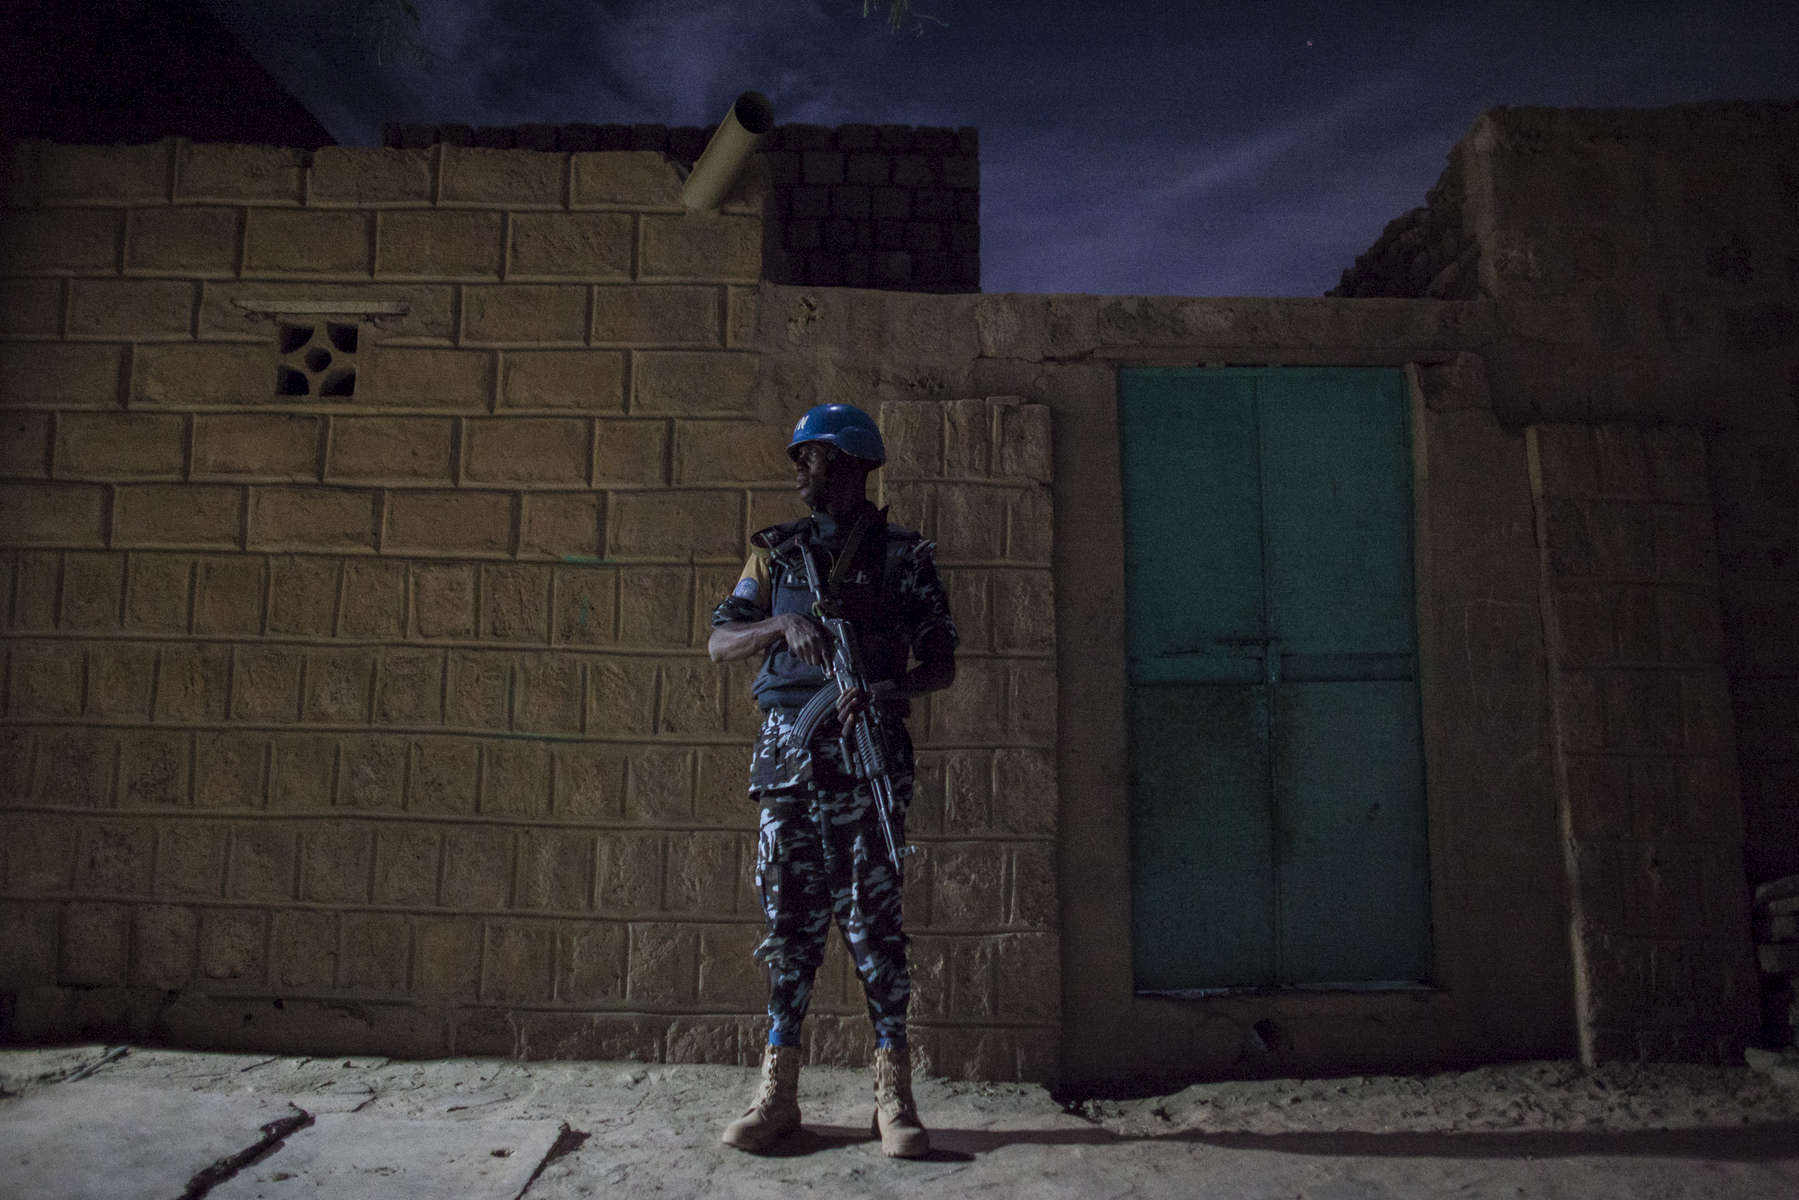 A United Nations police officer stands on guard during a night patrol in the Abaradiou neighborhood in Timbuktu, Mali. Despite the end of the occupation, many Malians in Timbuktu find that security is still a major issue speaking of incidents of car jacking and looting. Even though crime is high, most of the deadly attacks that occur are against the United Nations Minusma mission, Malian soldiers and the French military. 